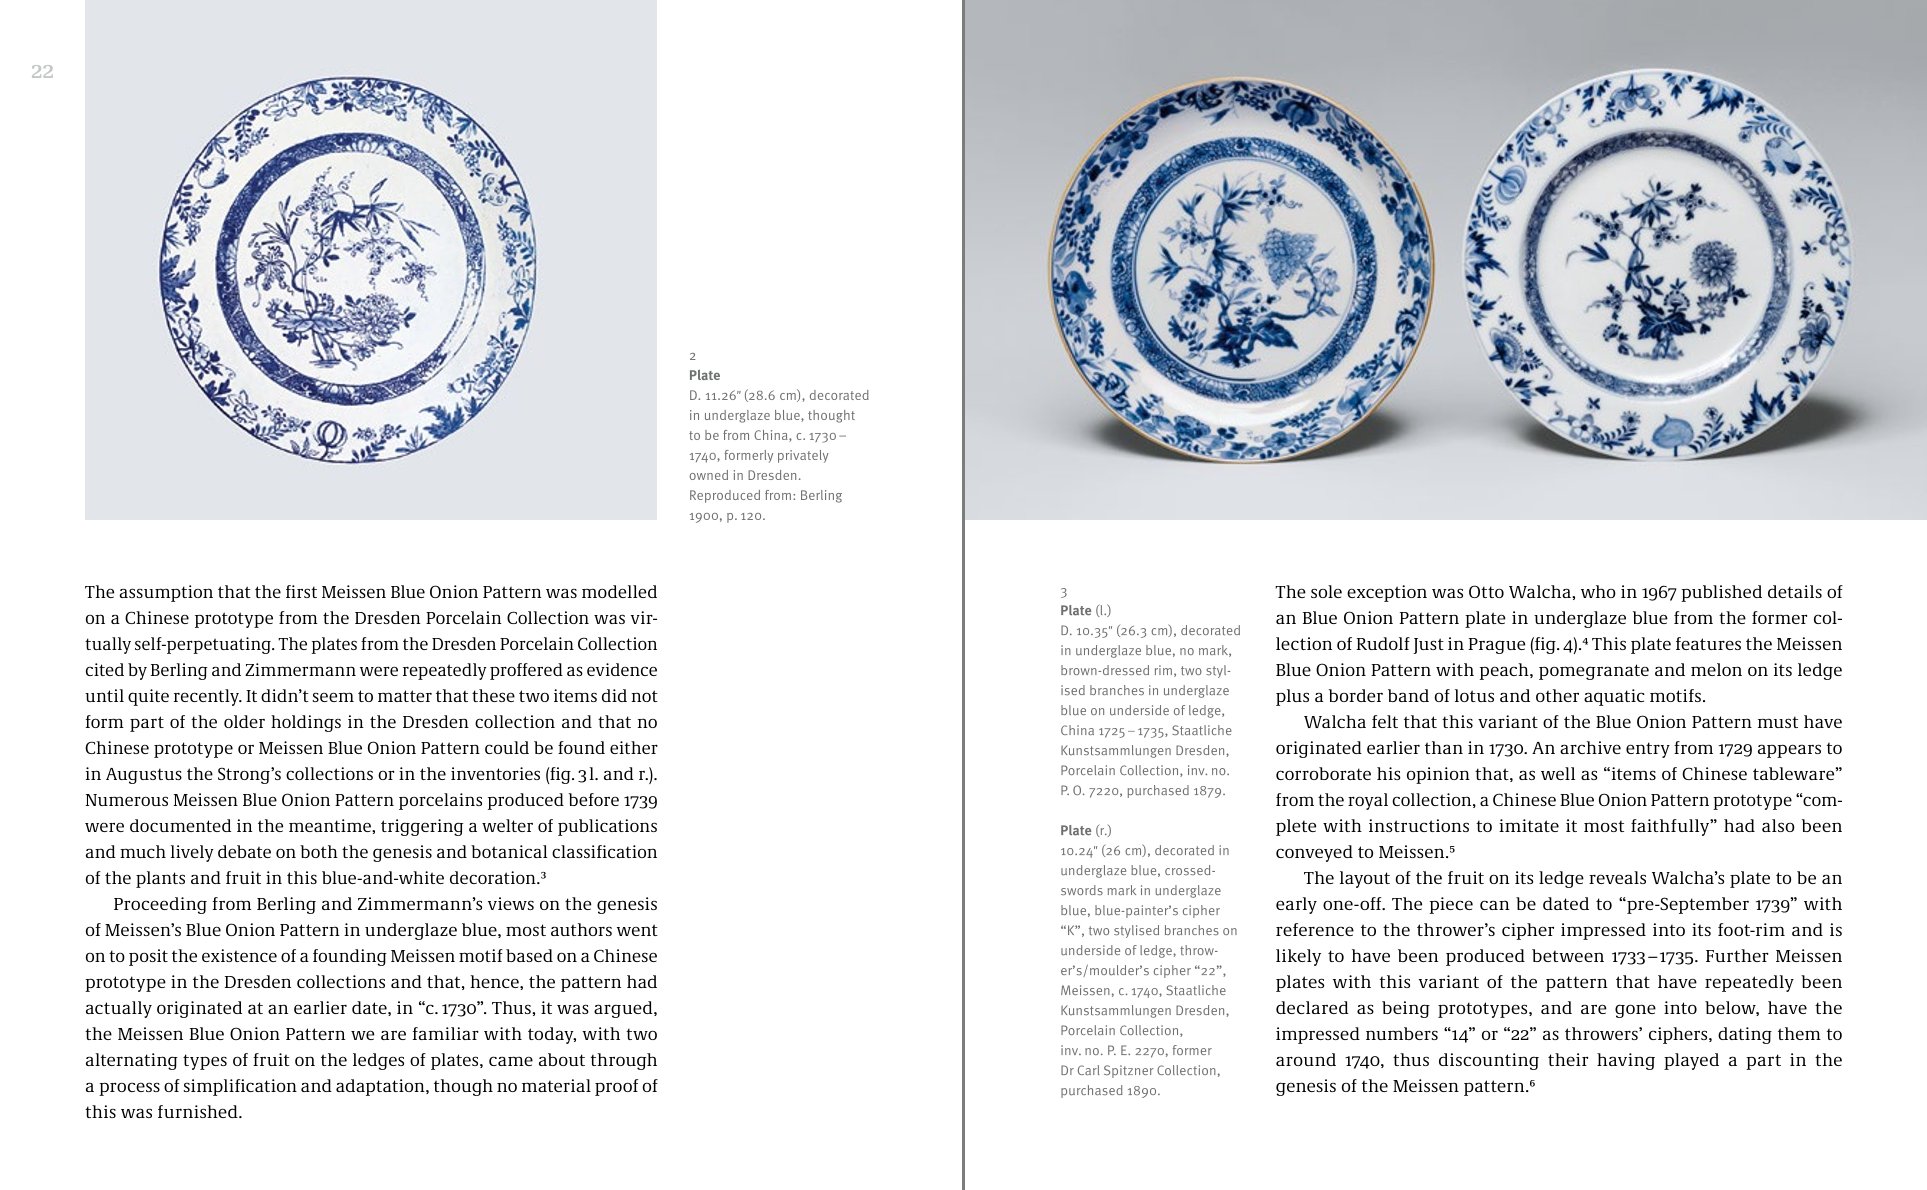 From China to Meissen | 300 Years of Blue Onion Pattern